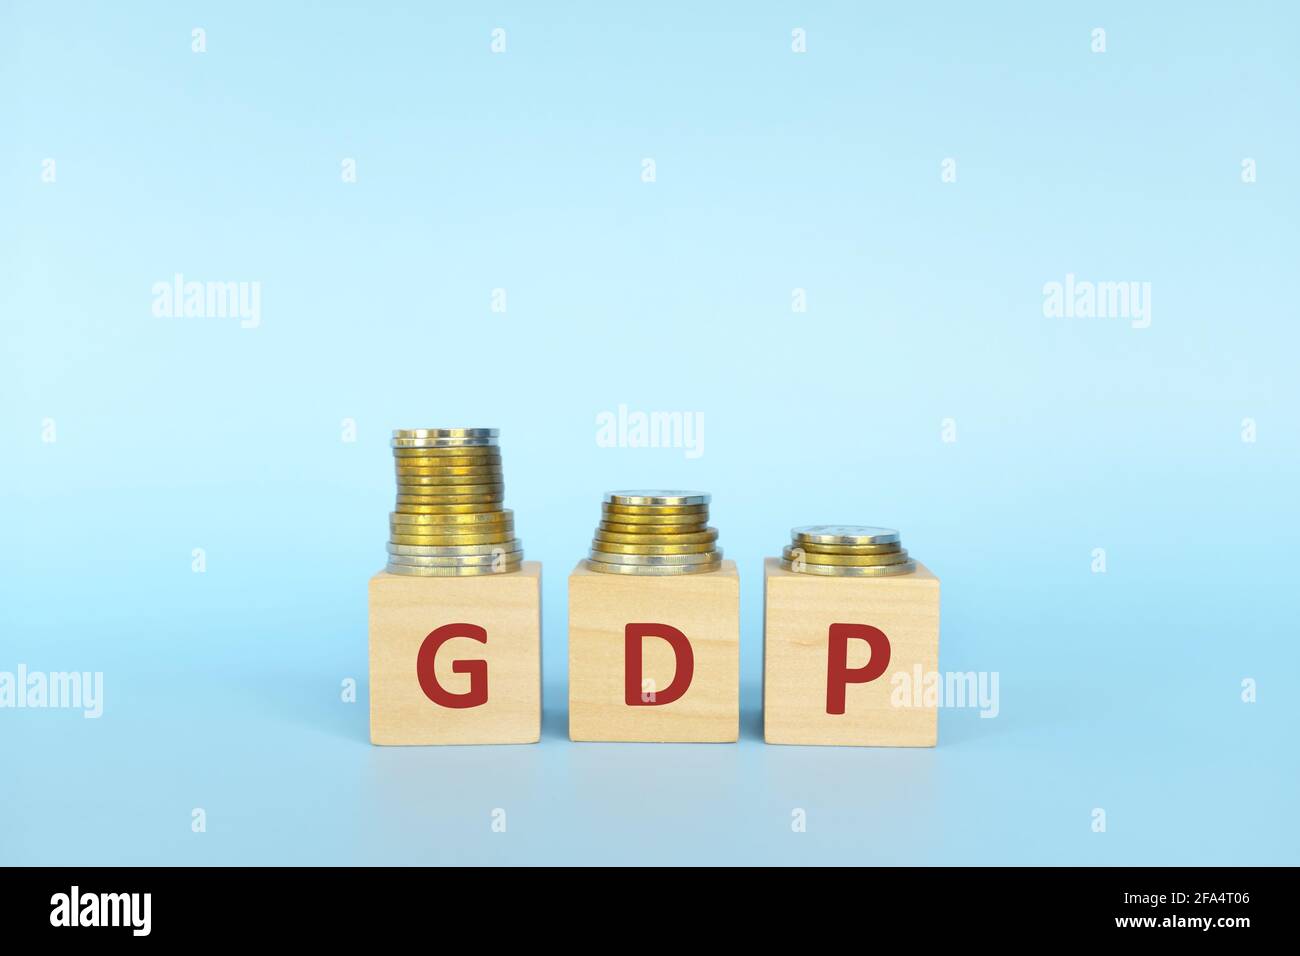 GDP or gross domestic product letters in wooden blocks with decreasing stack of coins. Economic crisis, decline and recession concept. Stock Photo